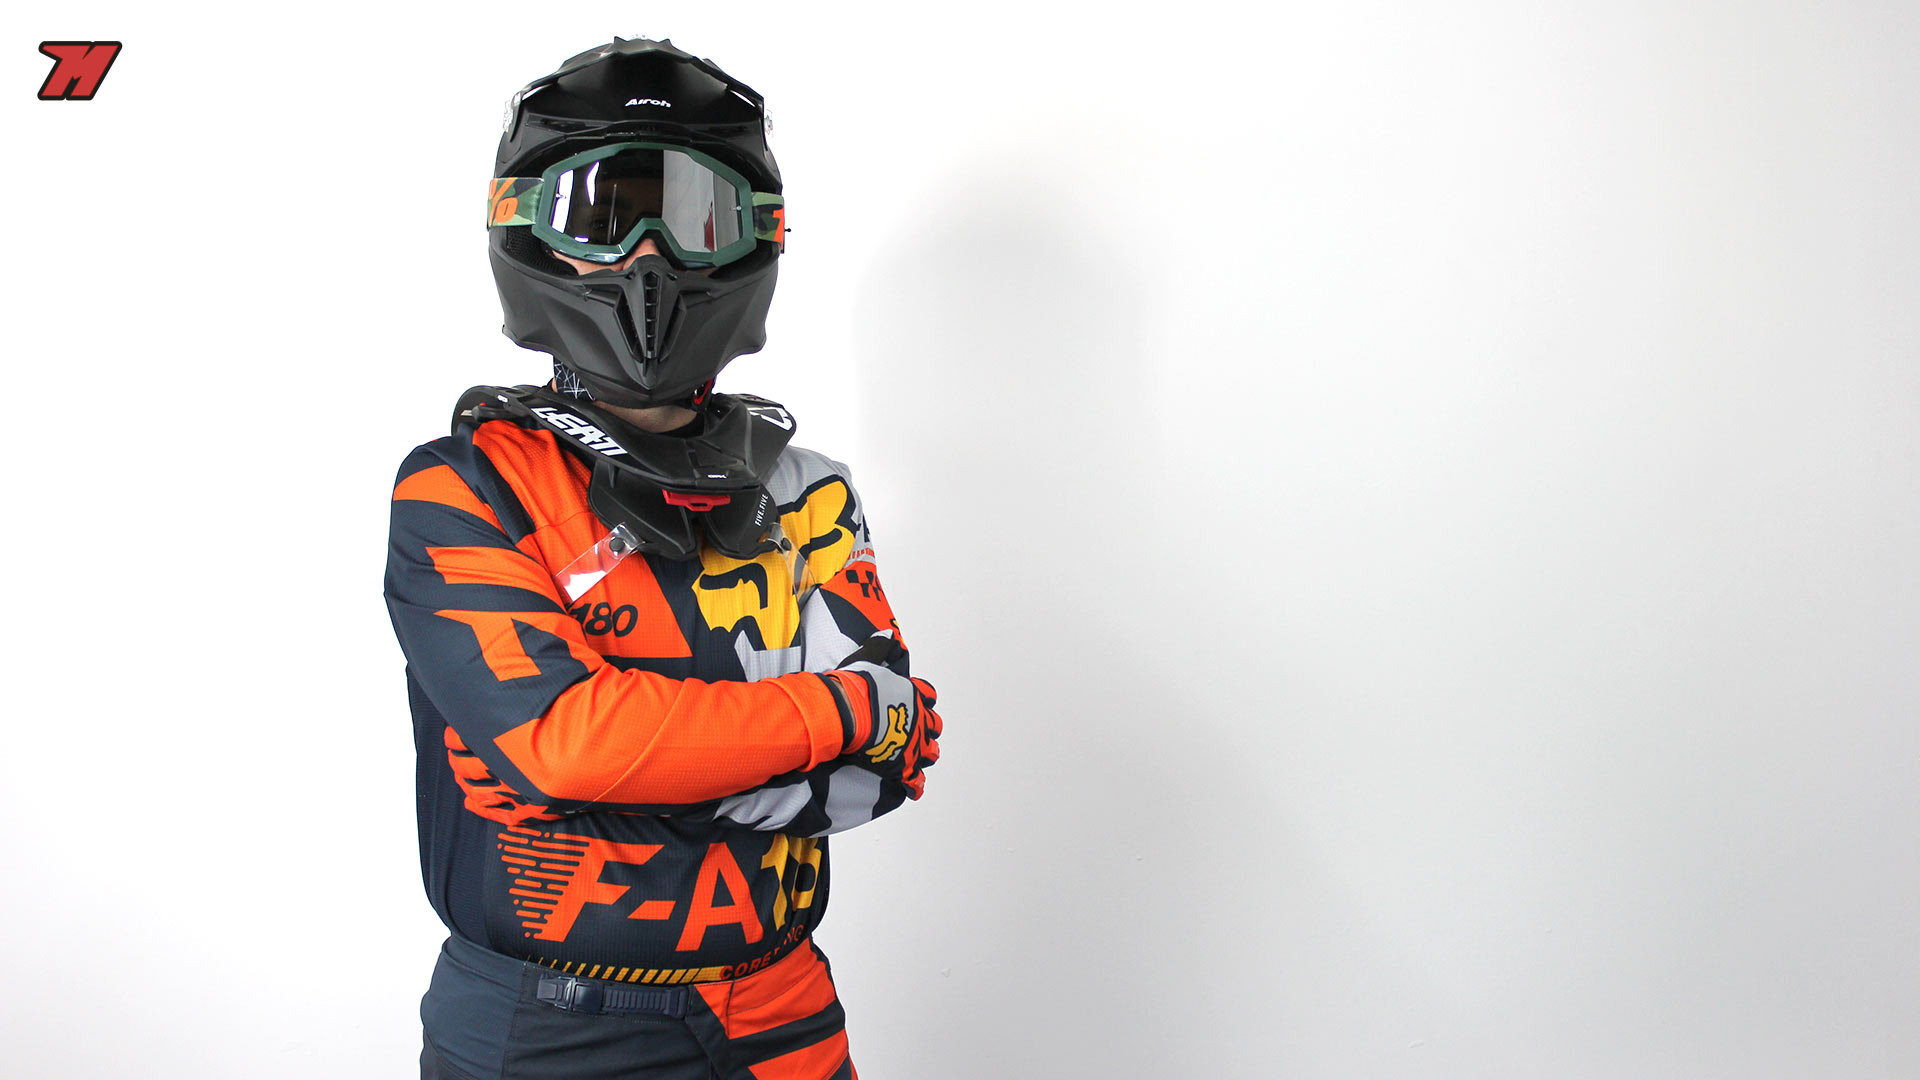 Pare-pierre moto cross manches longues Alpinestars sequence